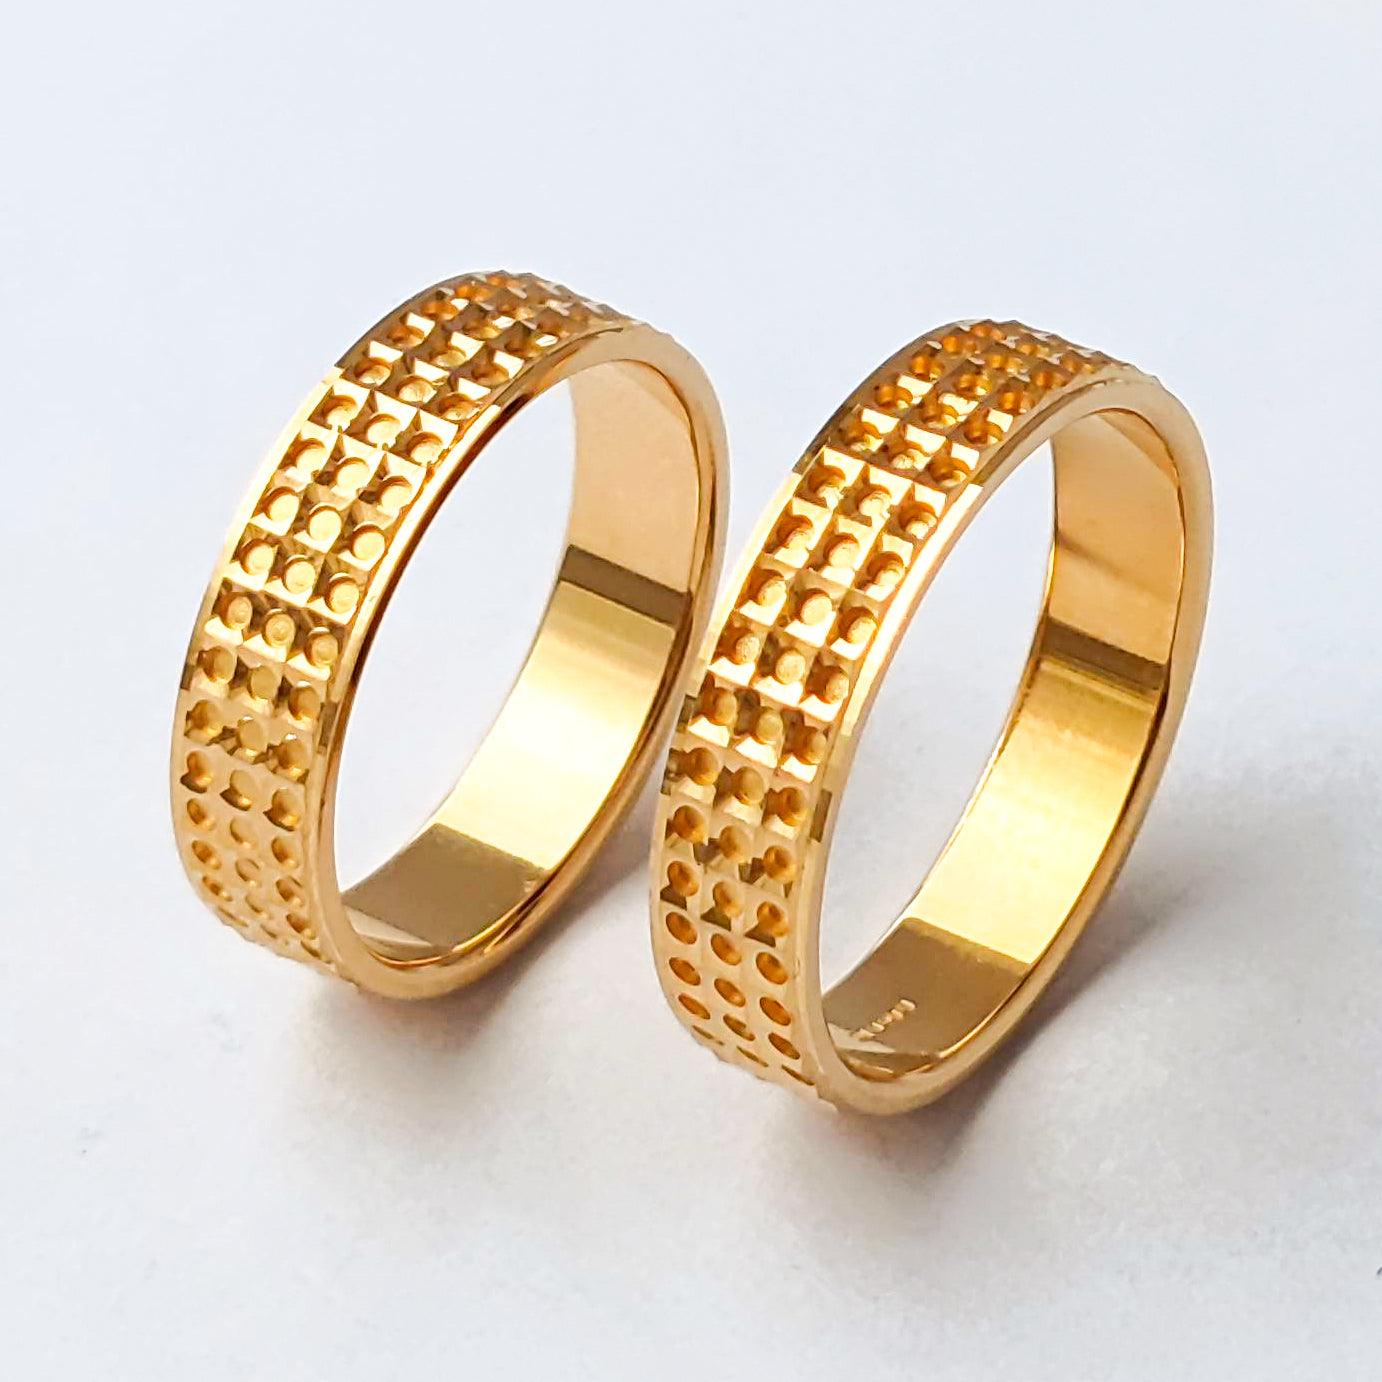 22ct Gold Wedding Band with Pitted Finish LR/GR-8219